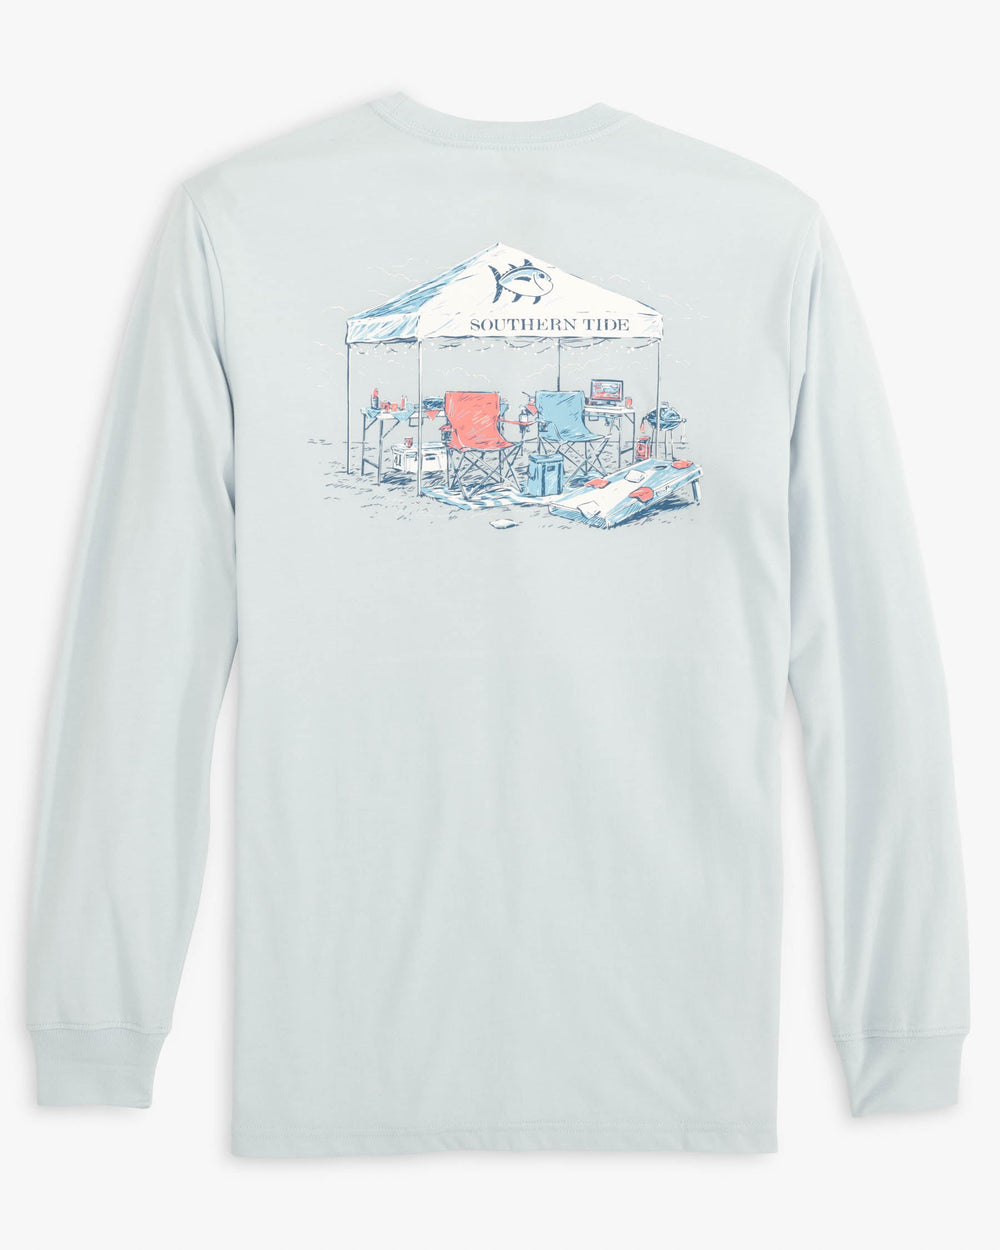 The back view of the Time for a Tailgate Long Sleeve T-Shirt by Southern Tide - Iceberg Blue